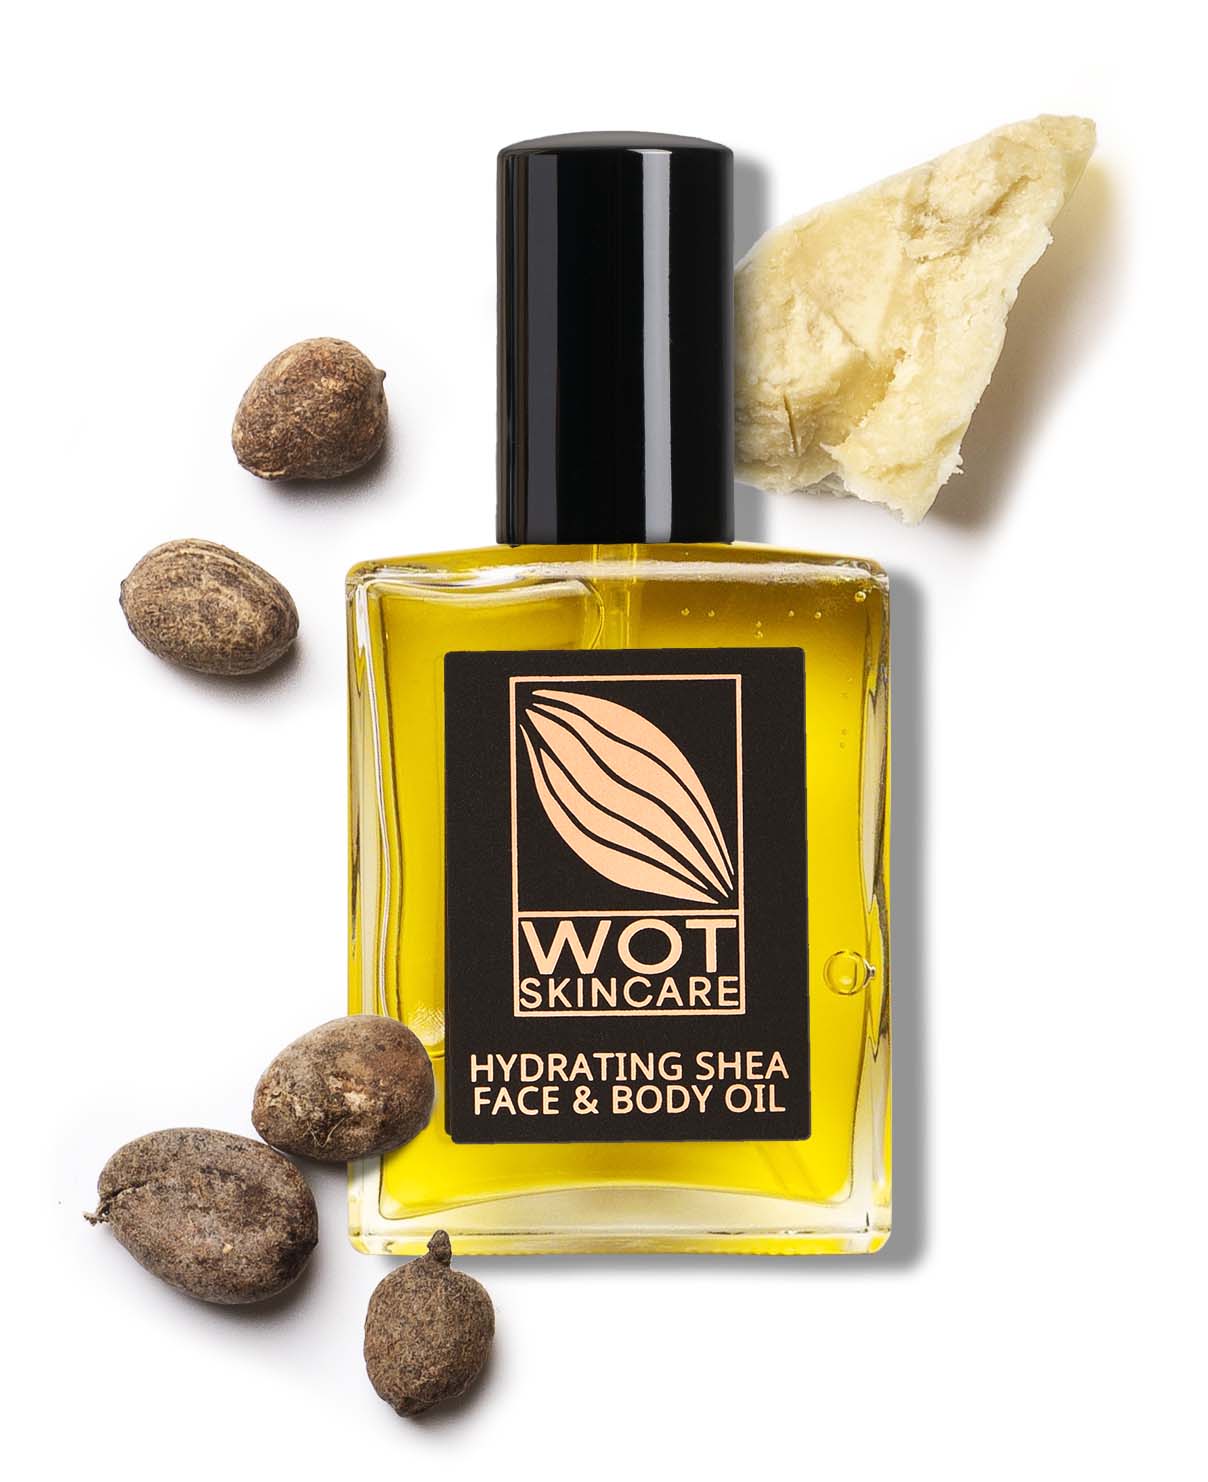 Shea Oil for Skin, with natural ingredients